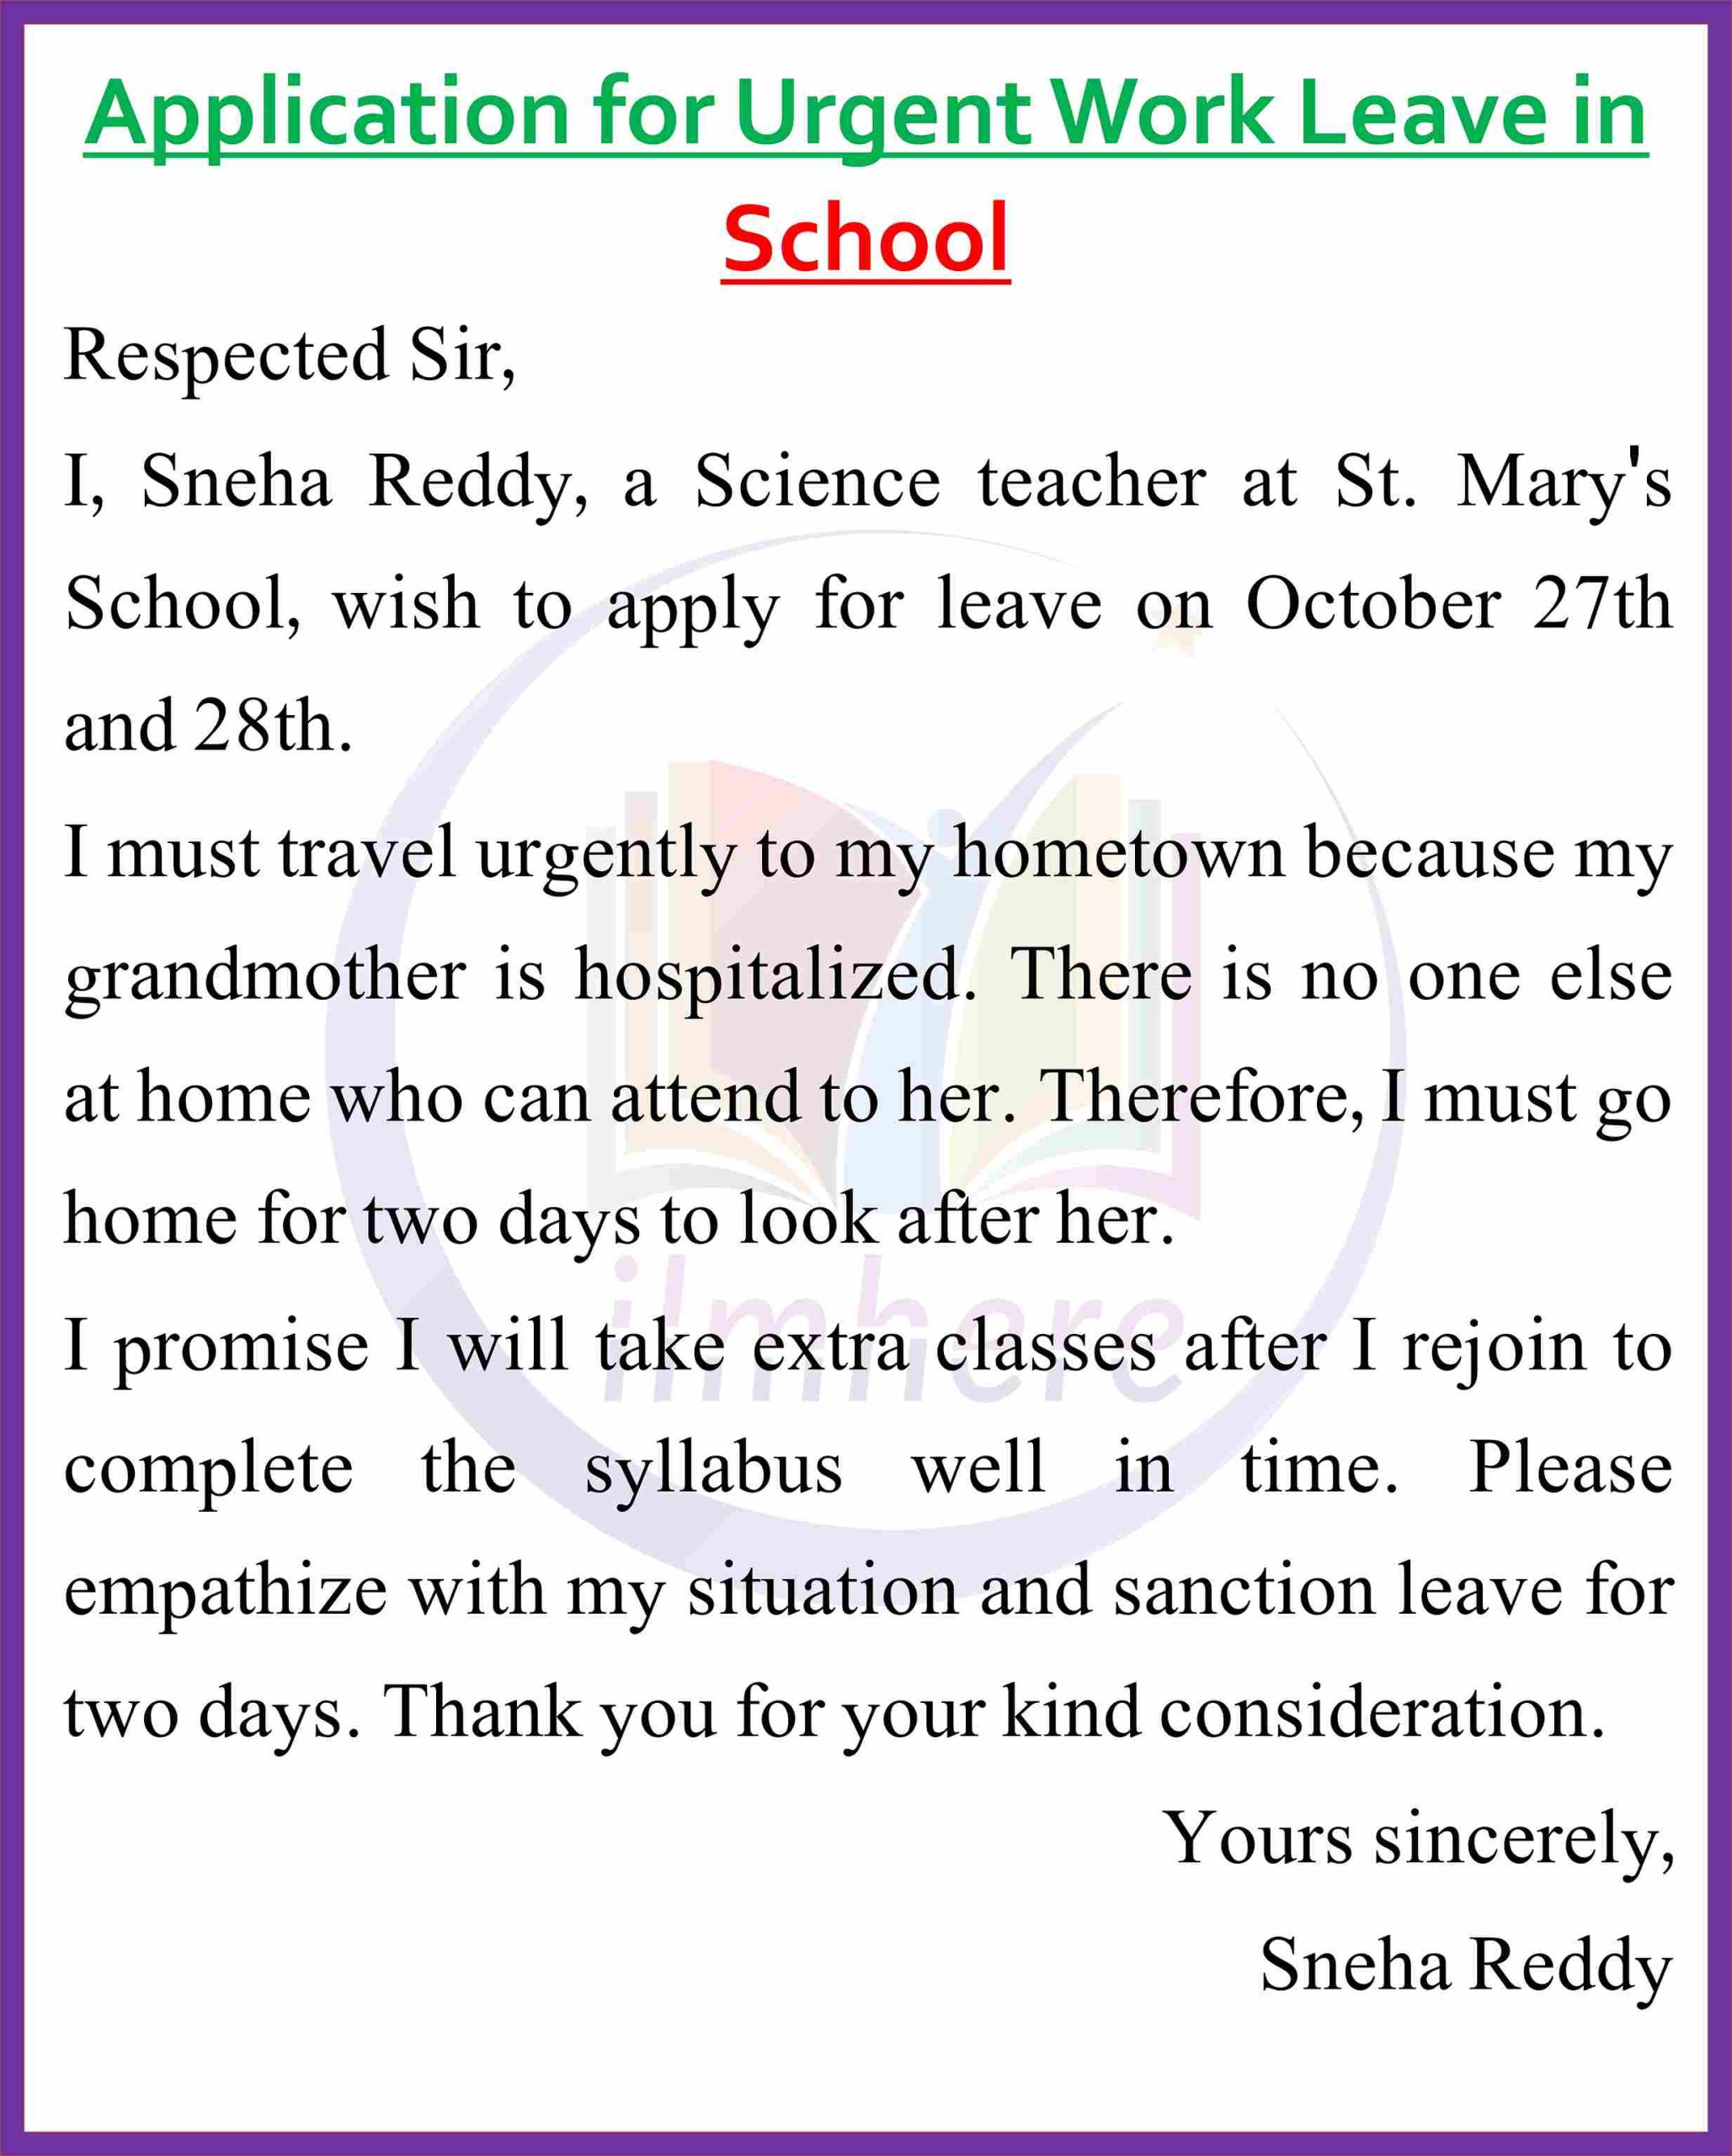 Application for Urgent Work Leave in School